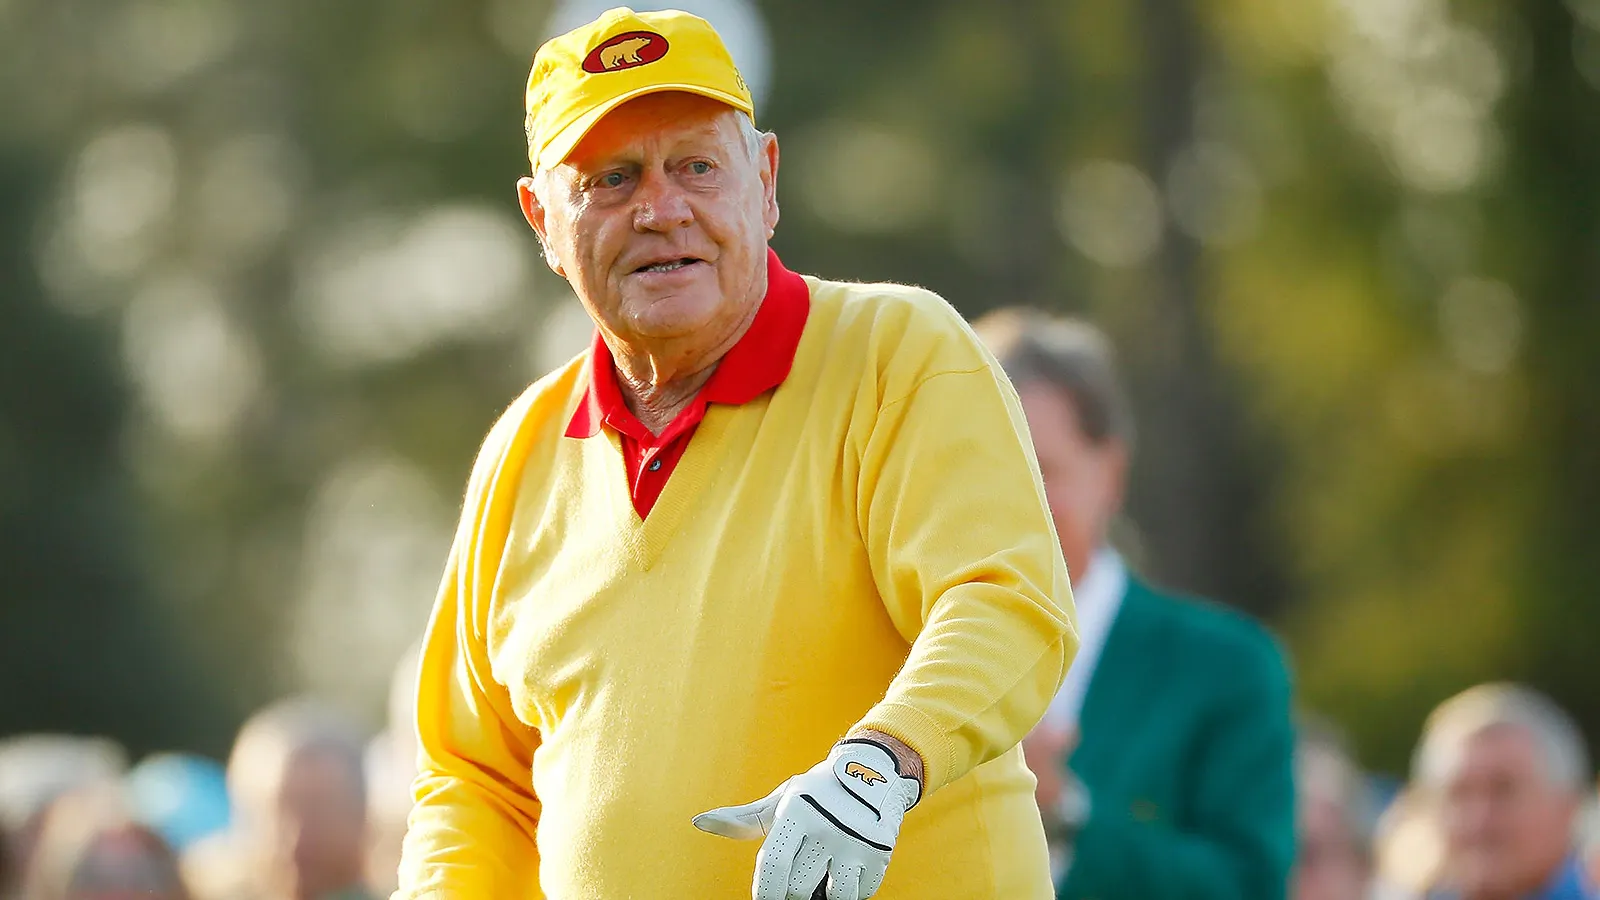 Jack Nicklaus is ranked 1st among Best Golfers of All Time